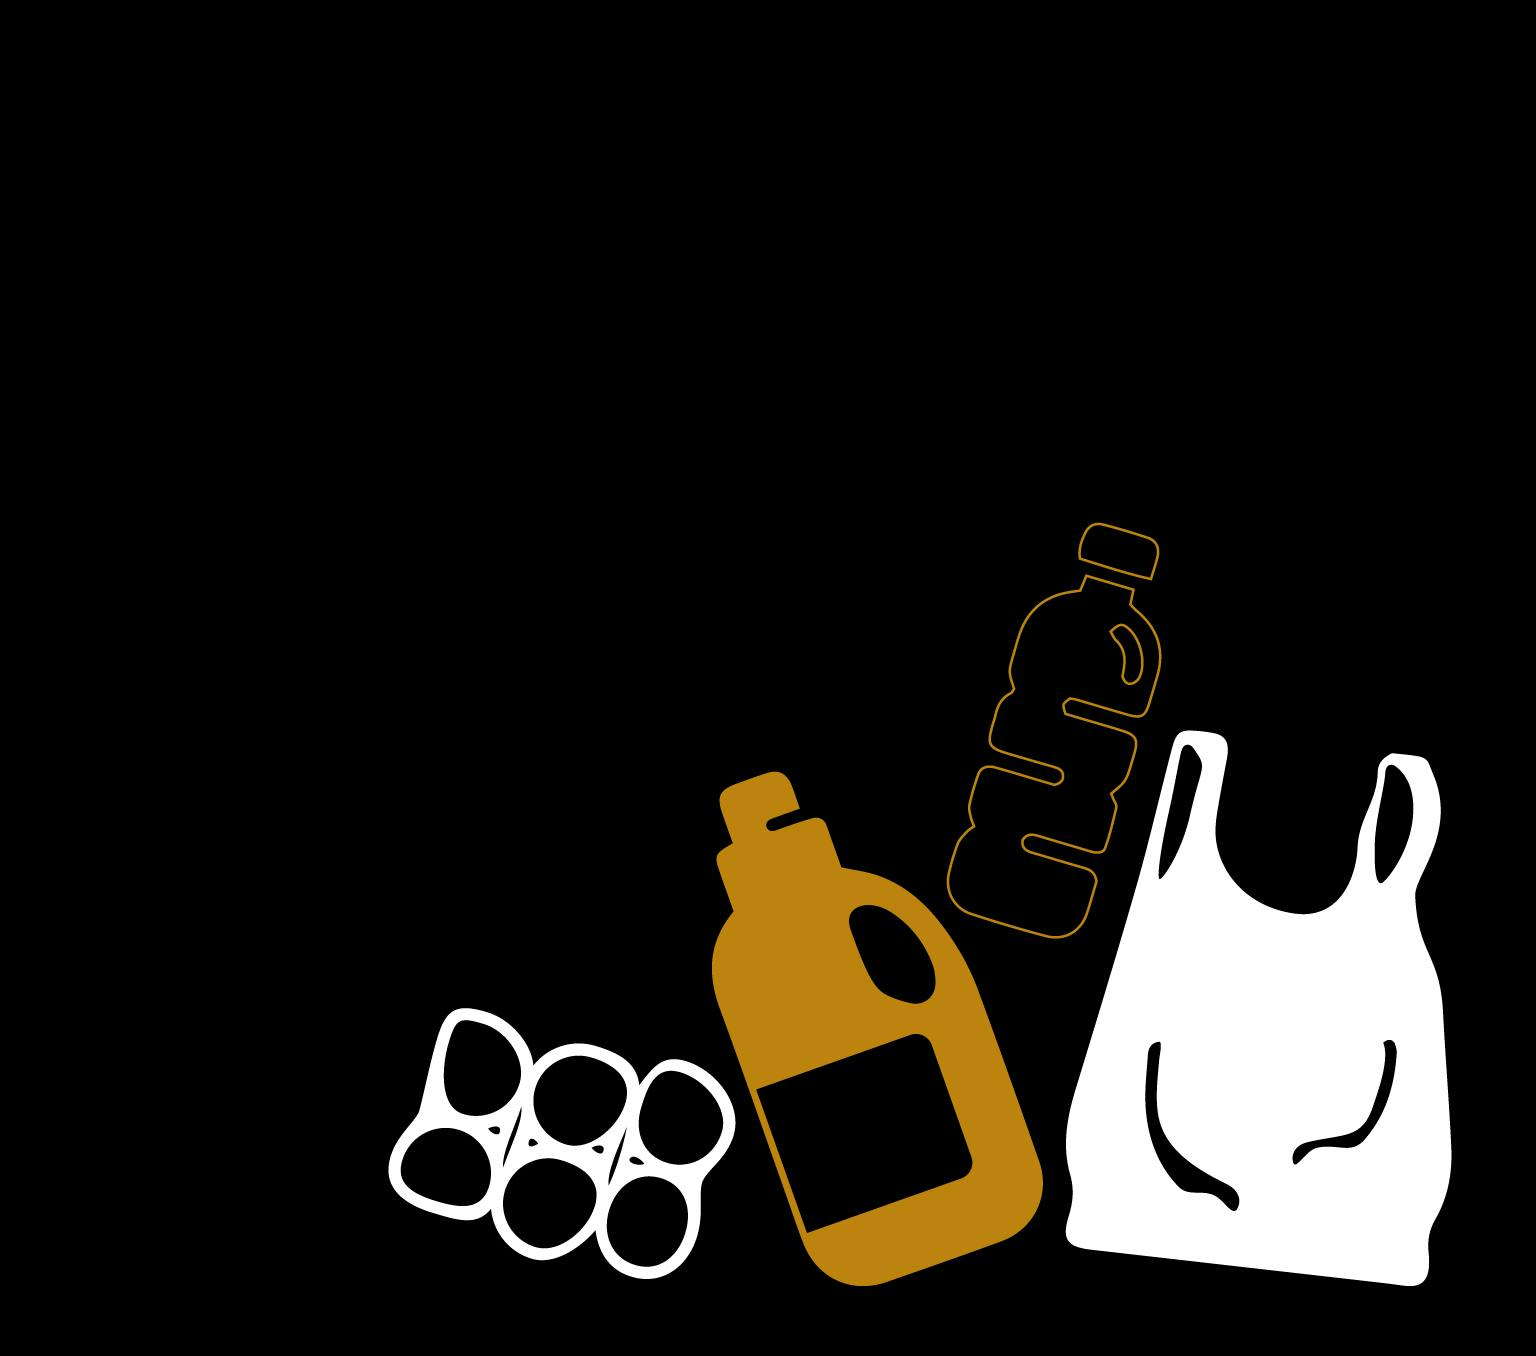 A white plastic bag, two gold plastic bottles and the plastic rings from a six-pack of cans are drawn against a black background.